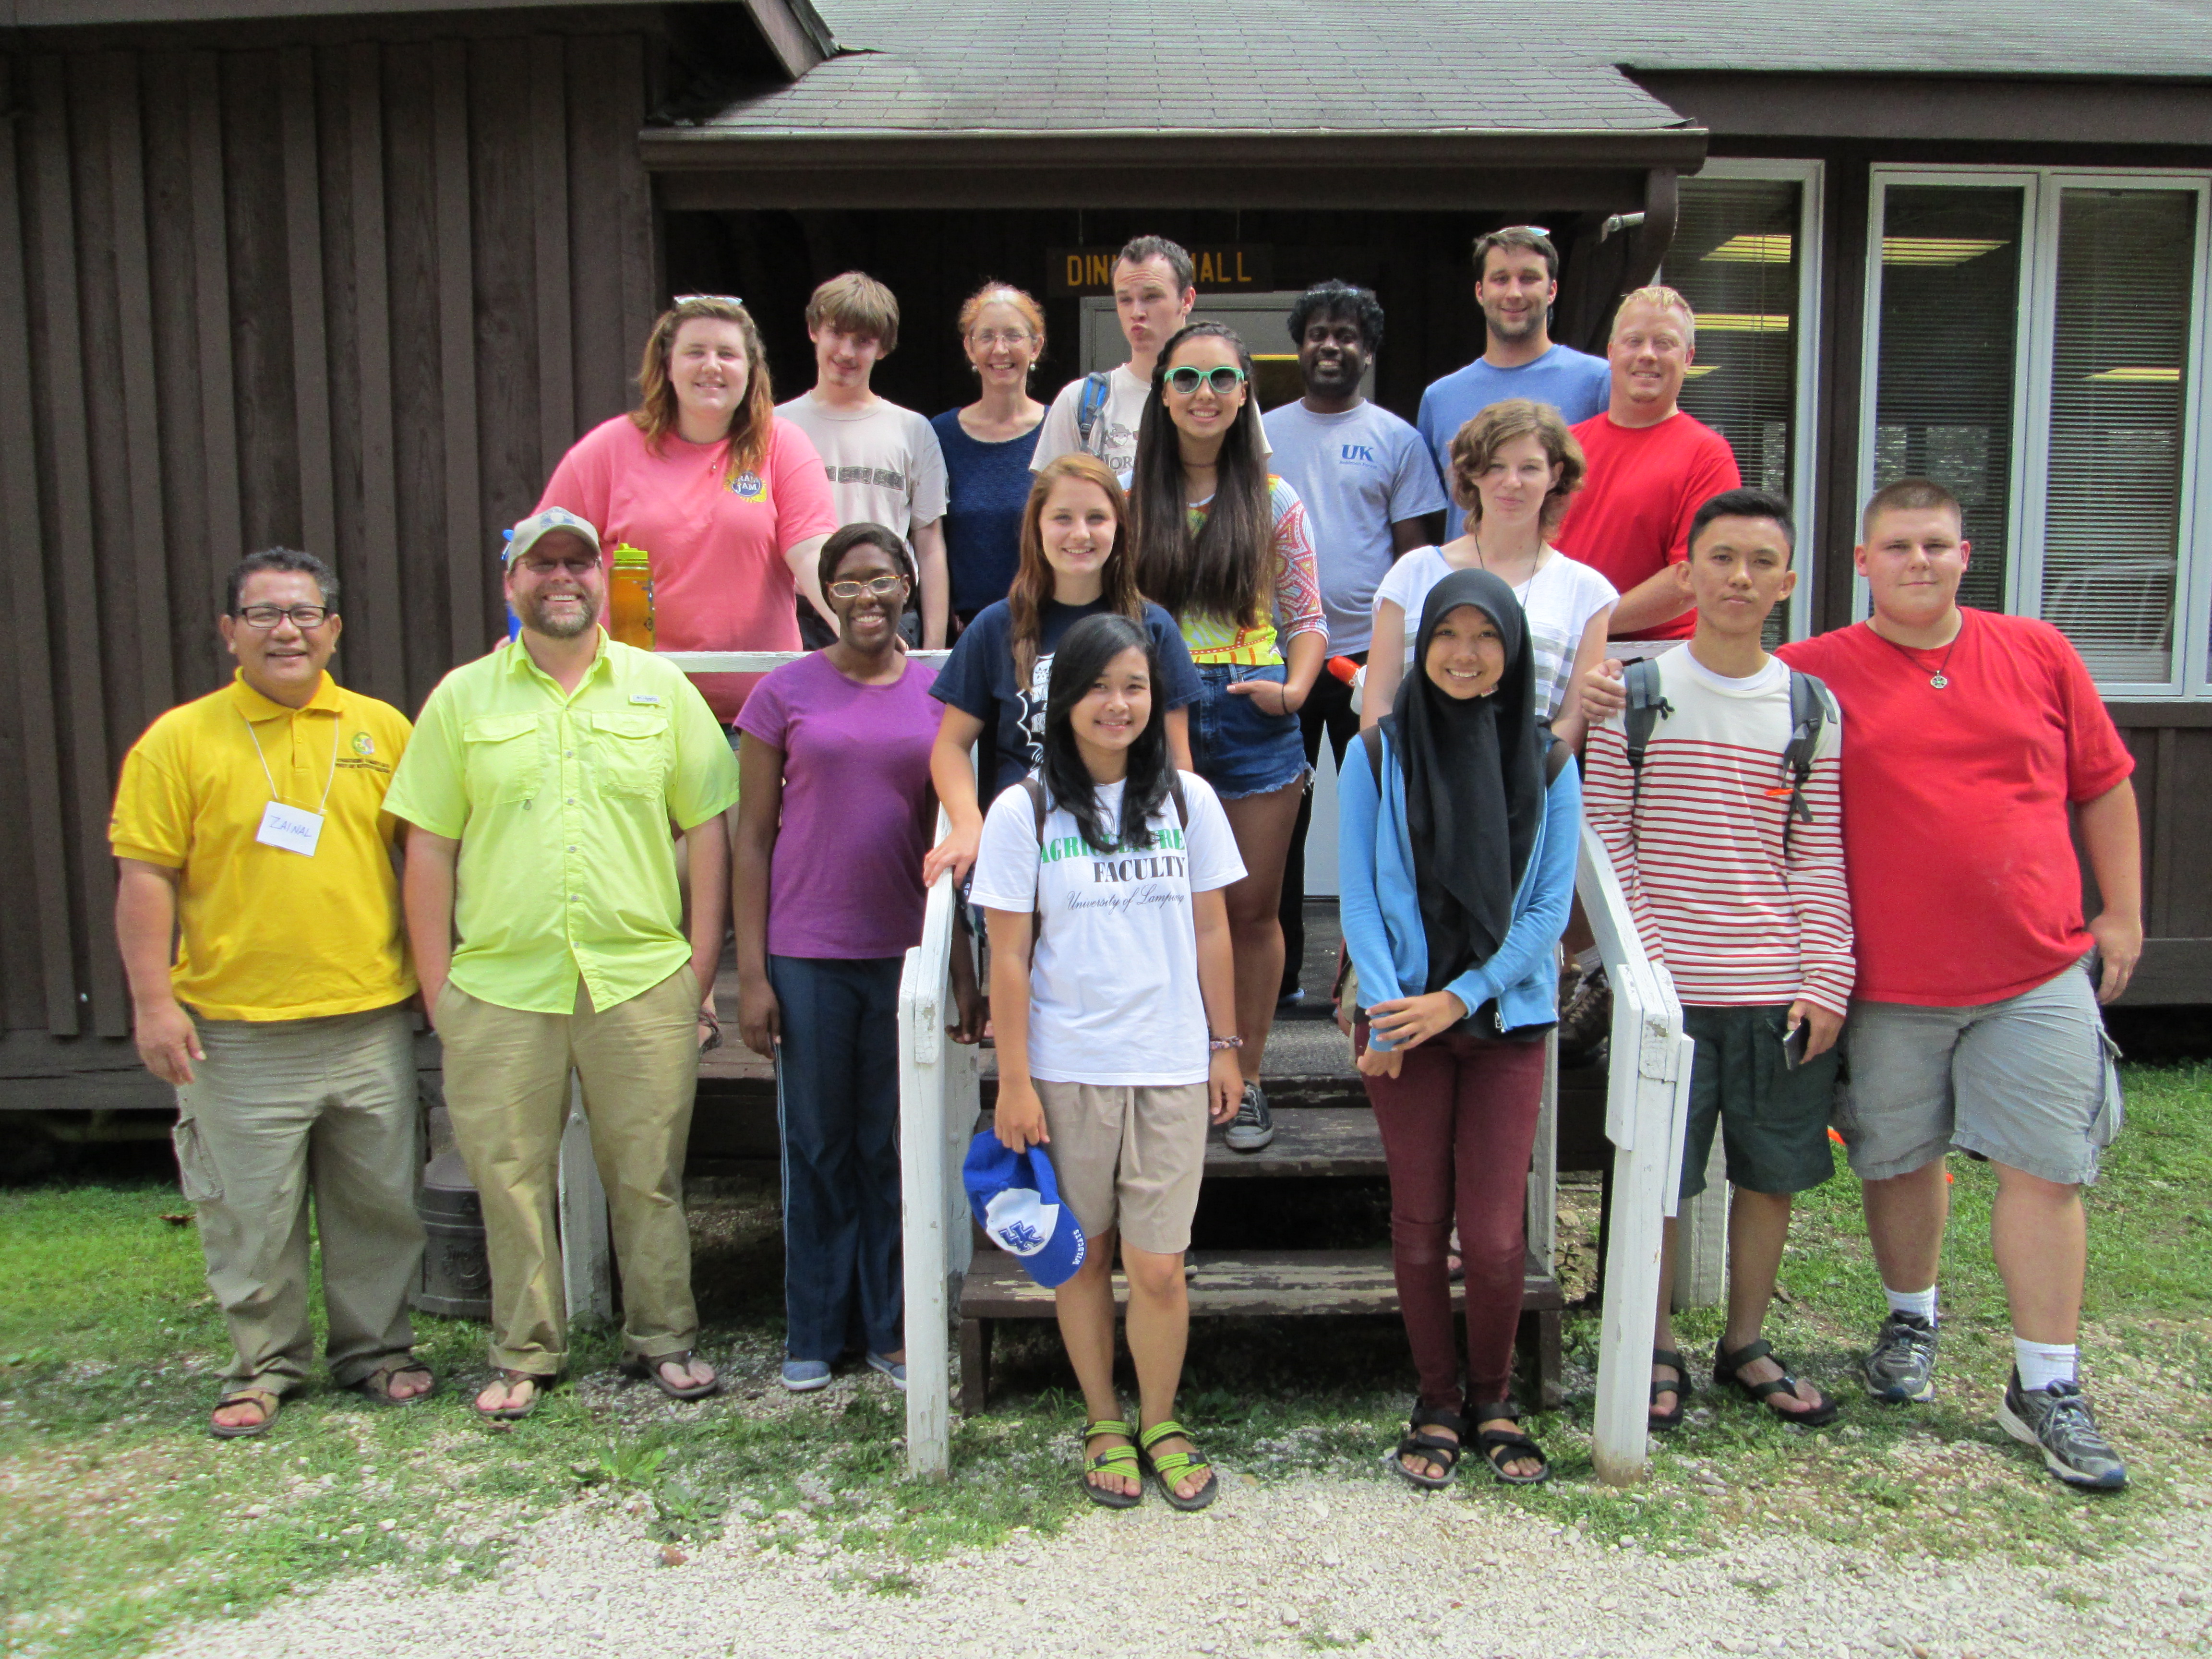 Participants at the water justice summit included students from the University of Kentucky and area high schools.